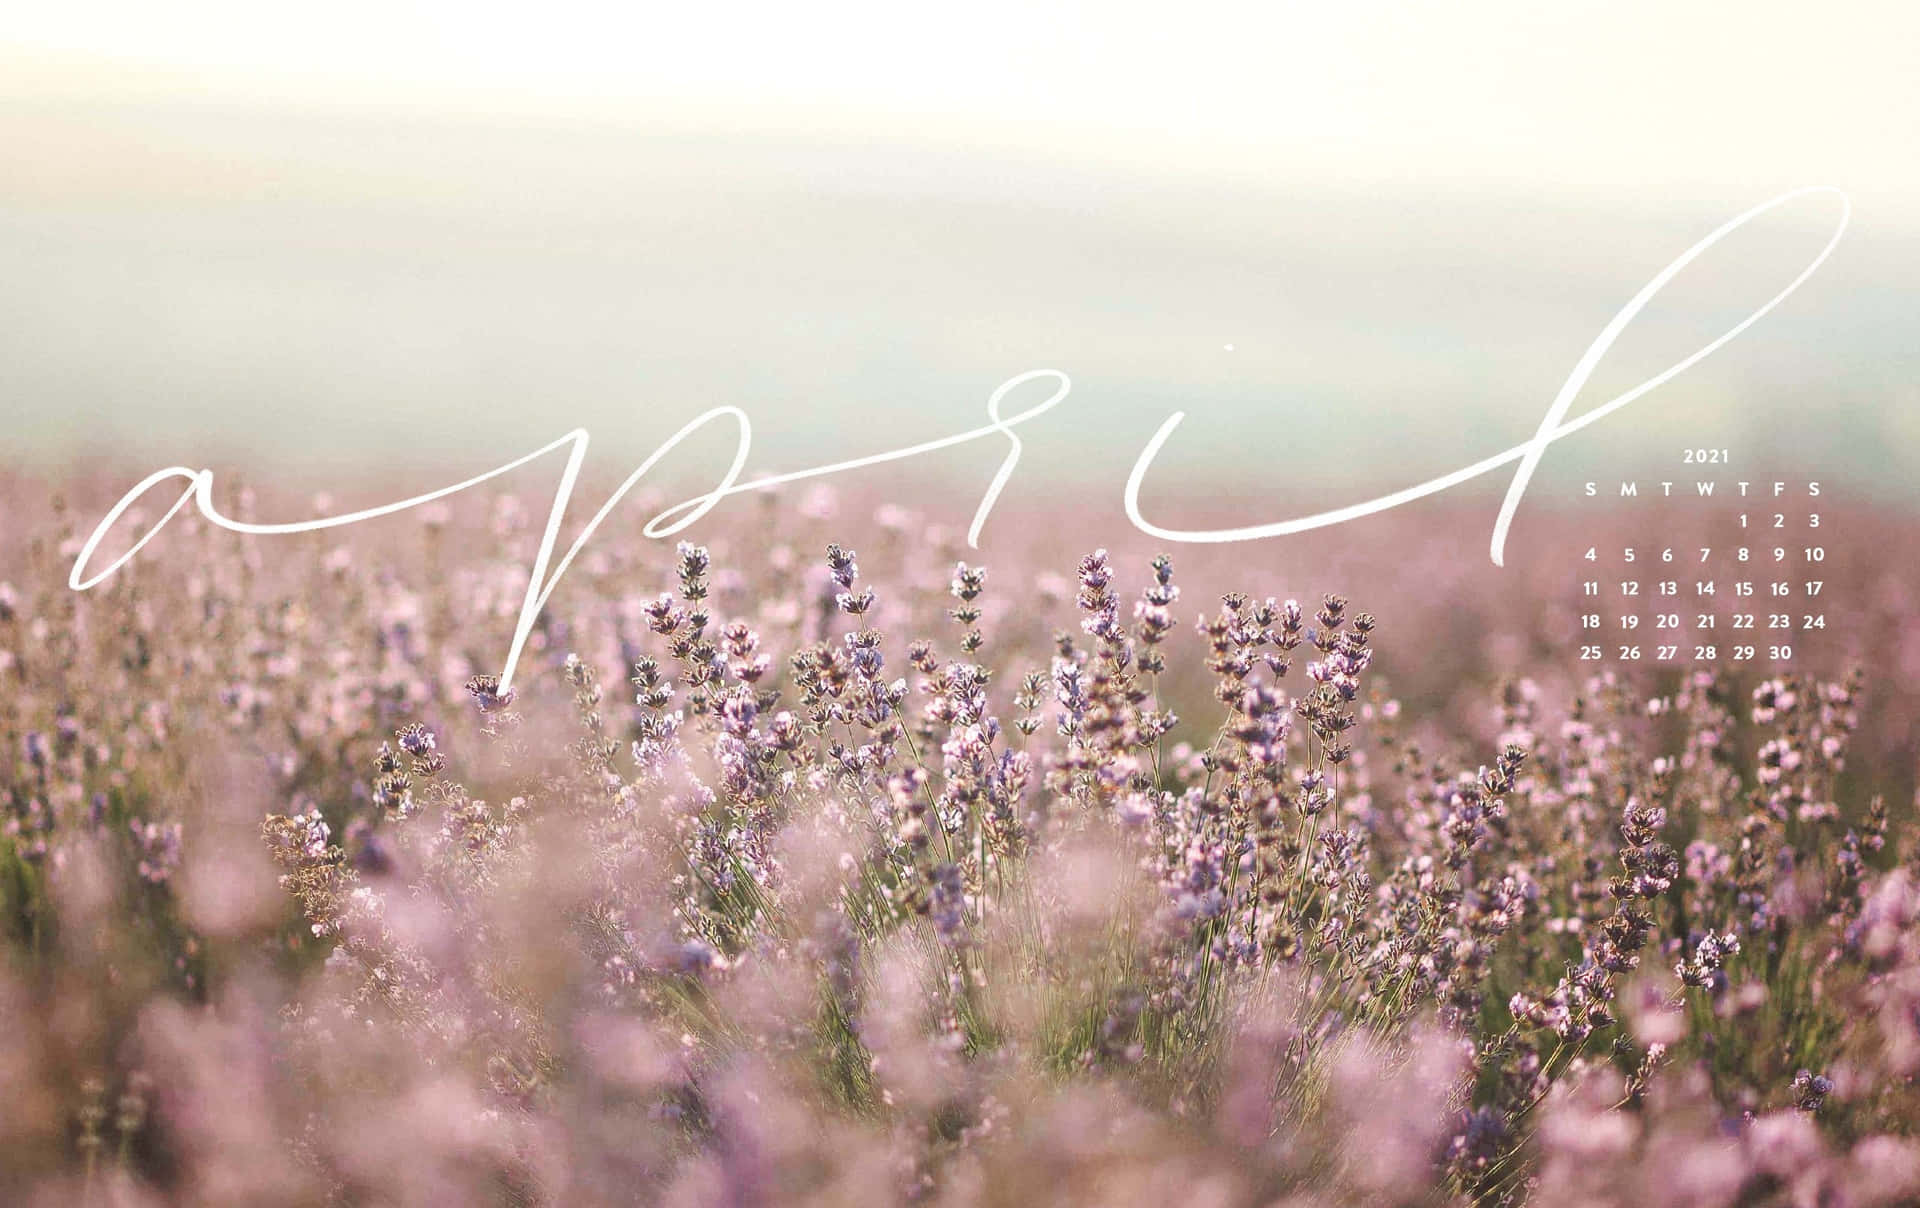 Enjoy the beauty of the season with this gorgeous Spring Aesthetic Desktop wallpaper! Wallpaper